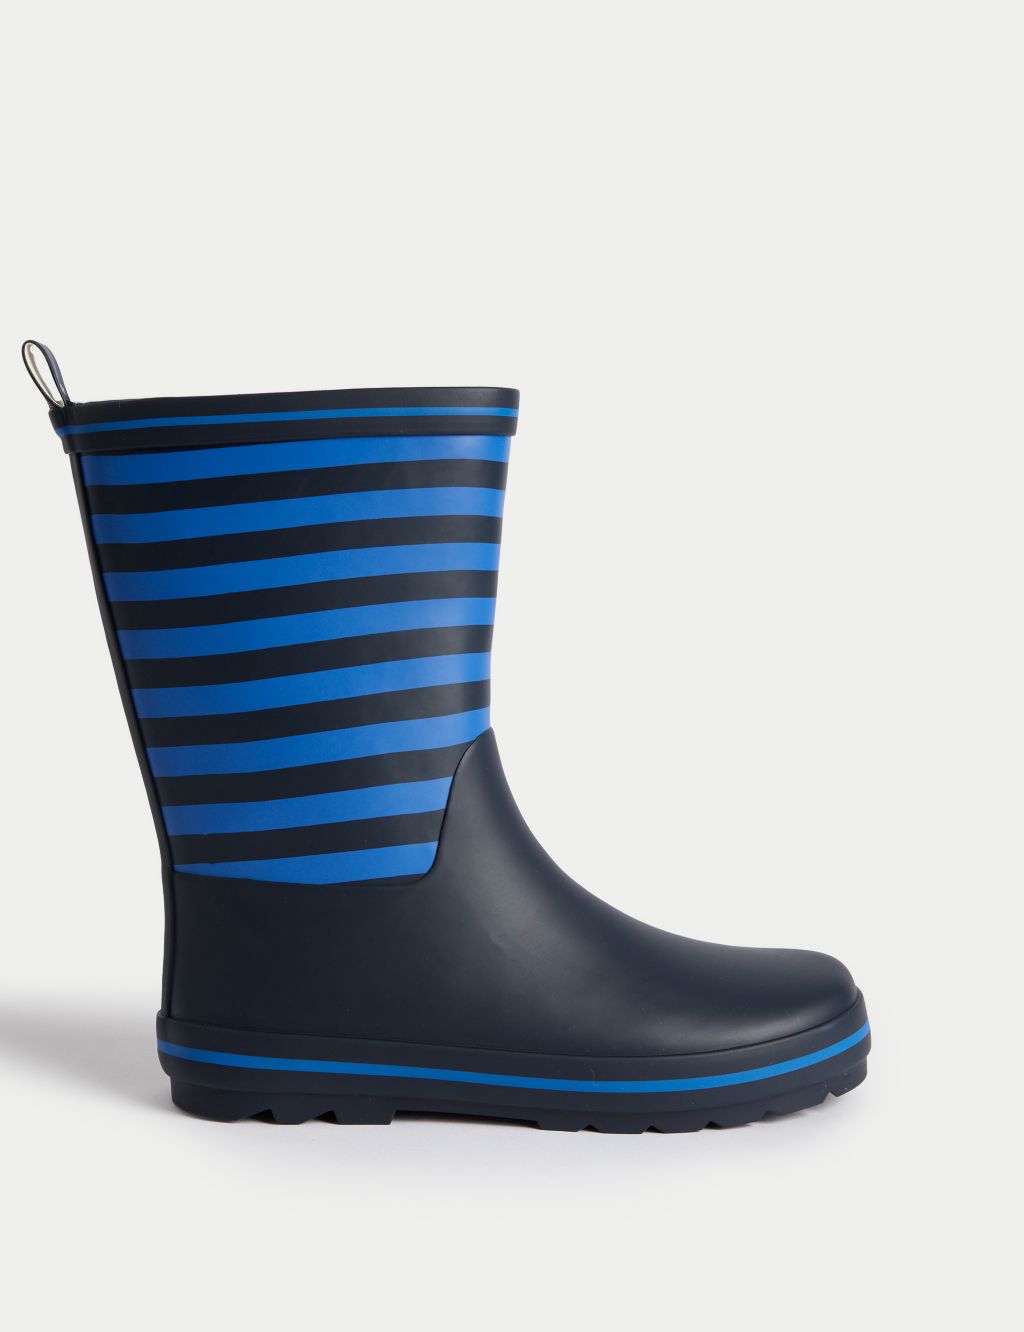 Kids' Striped Wellies (4 Small - 7 Large)